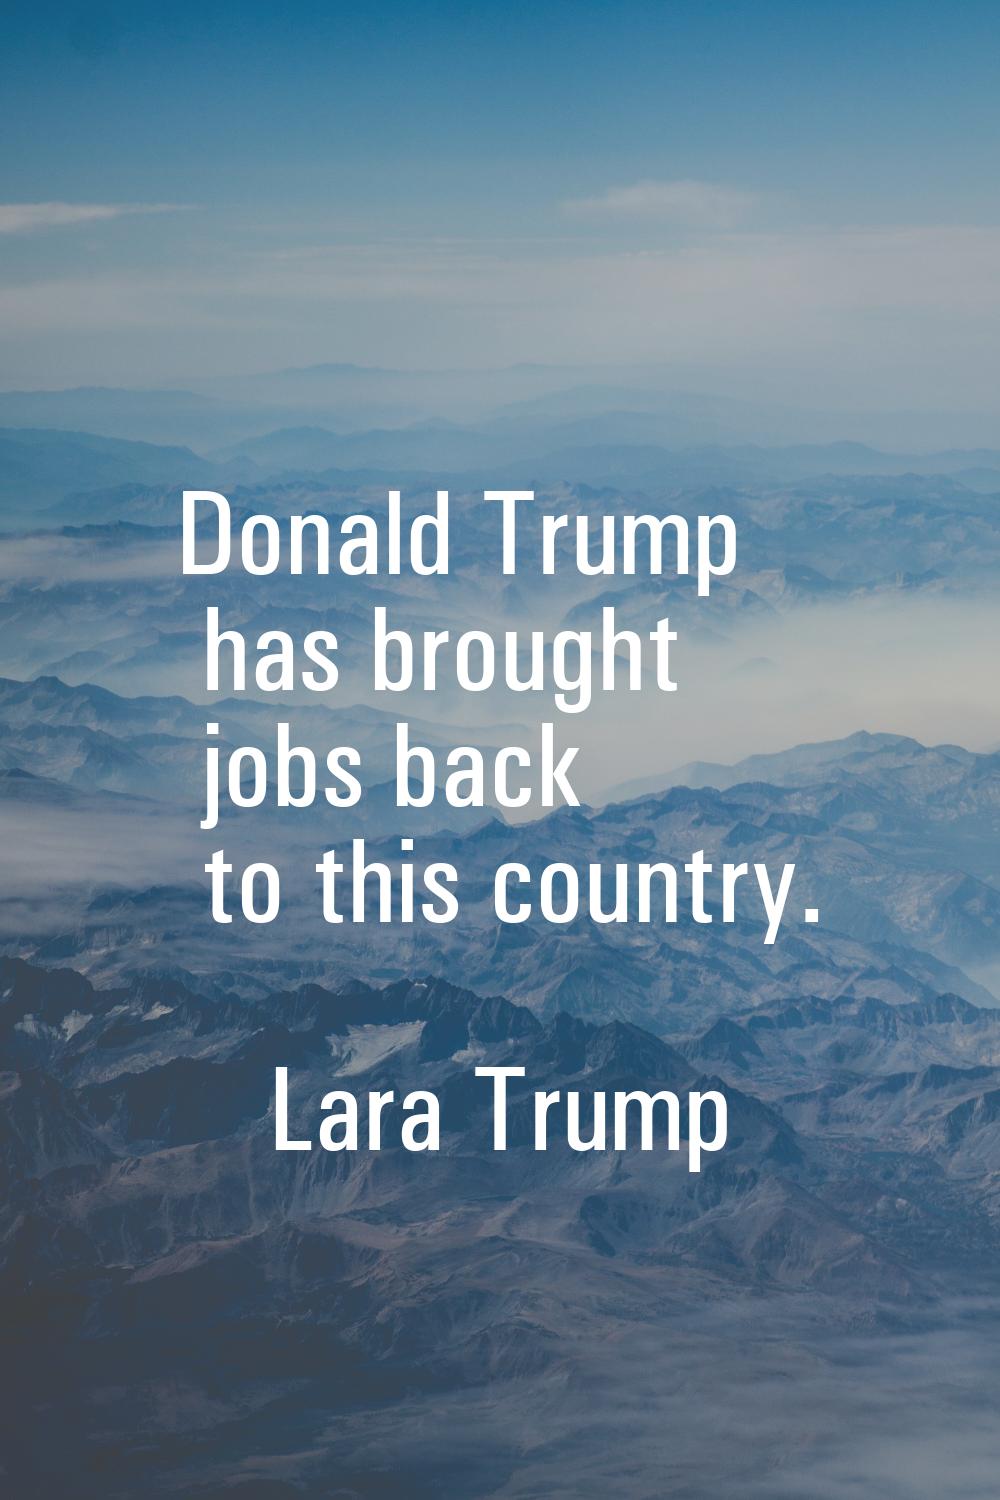 Donald Trump has brought jobs back to this country.